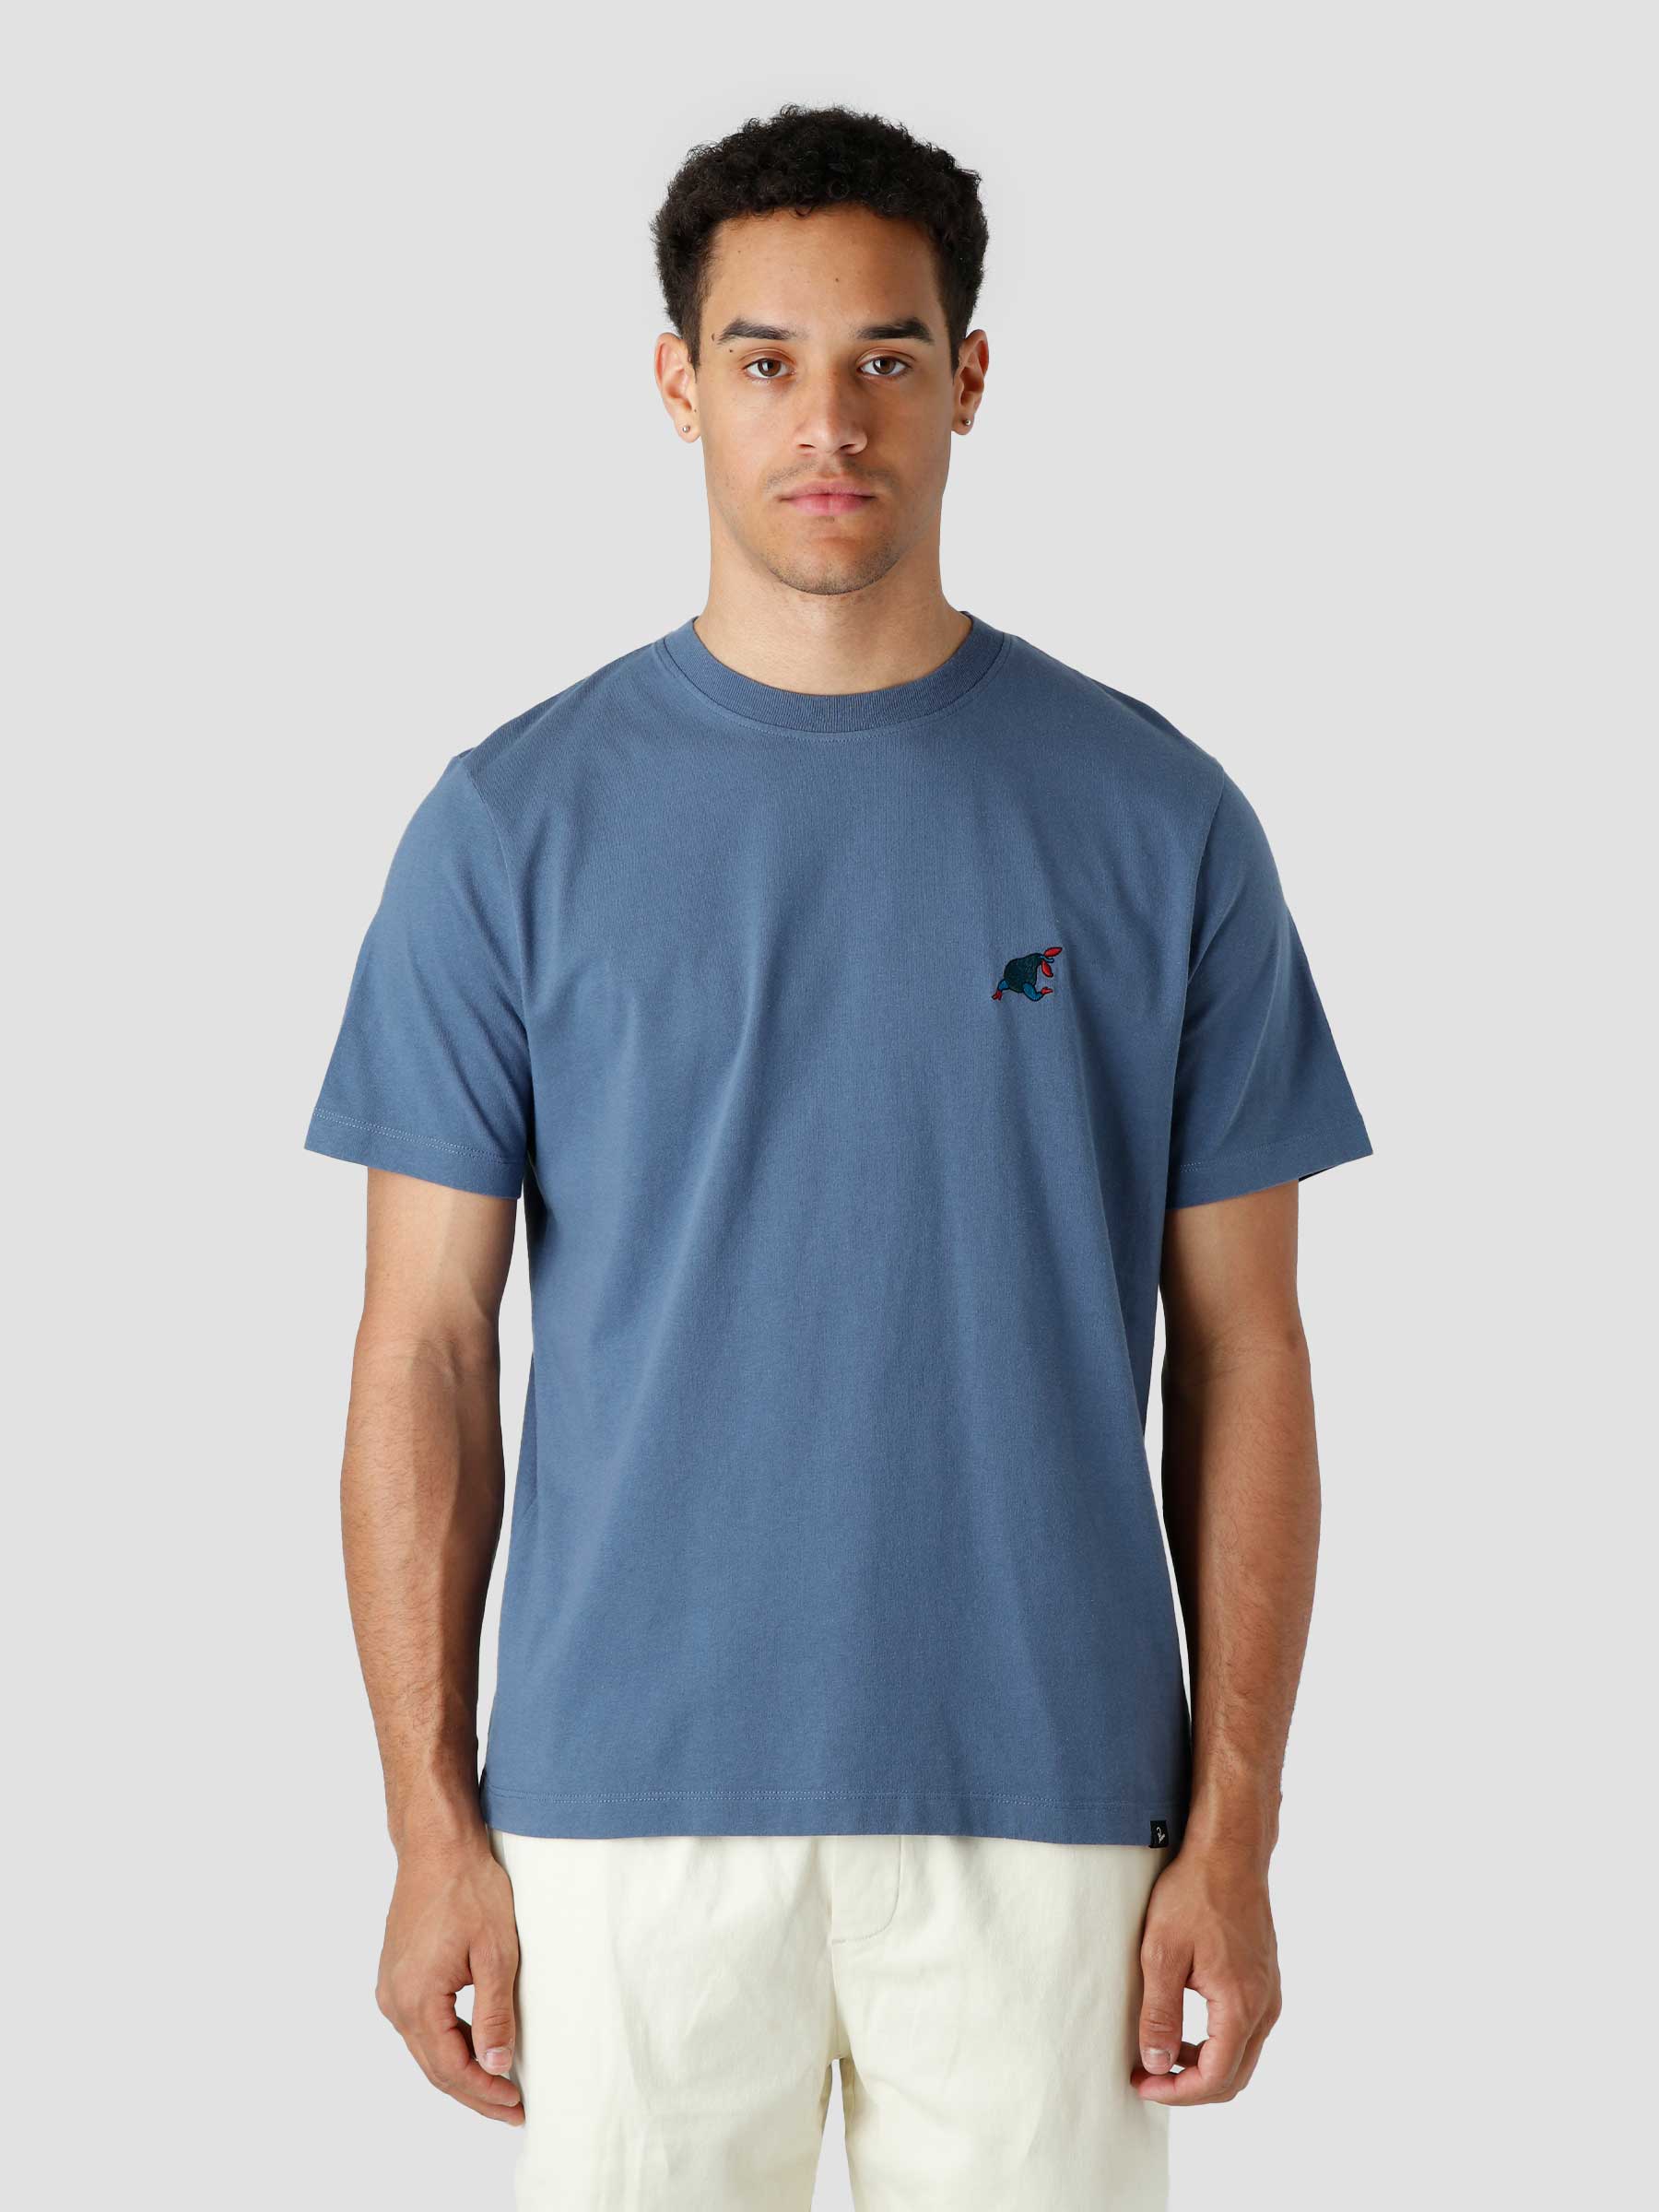 ByParra Blue Sitting Pear T-shirt
